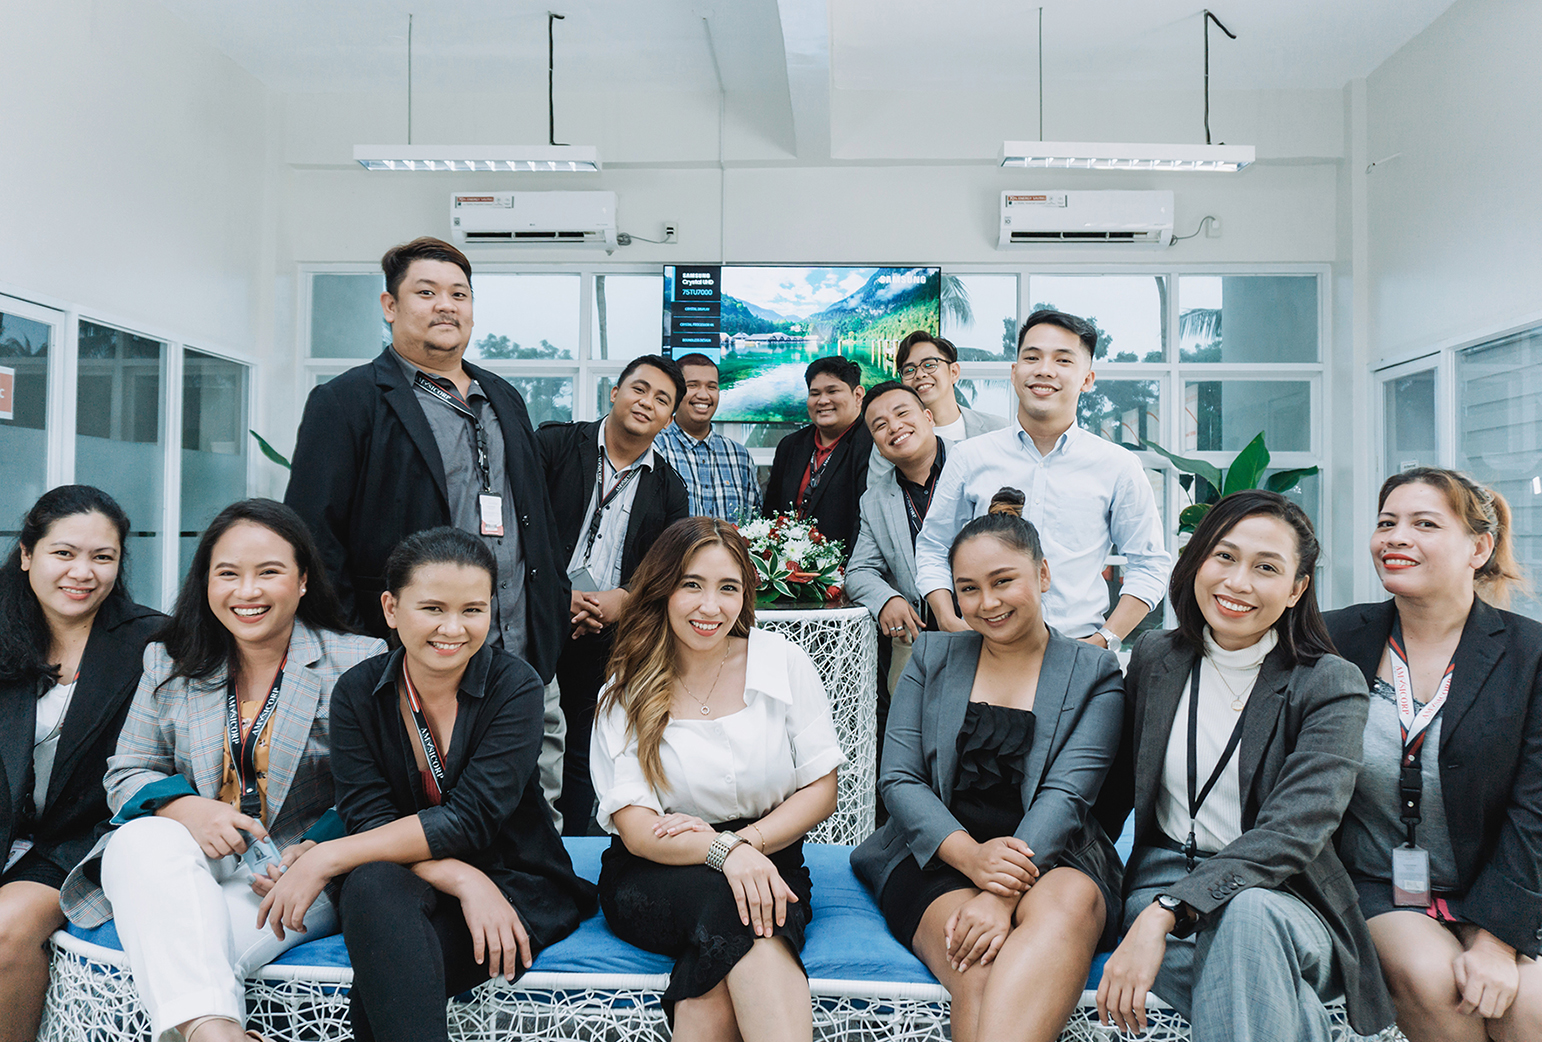 Interview, Globe, Globe Telecom, Group Photo, Front Group Picture, Women Sitting,